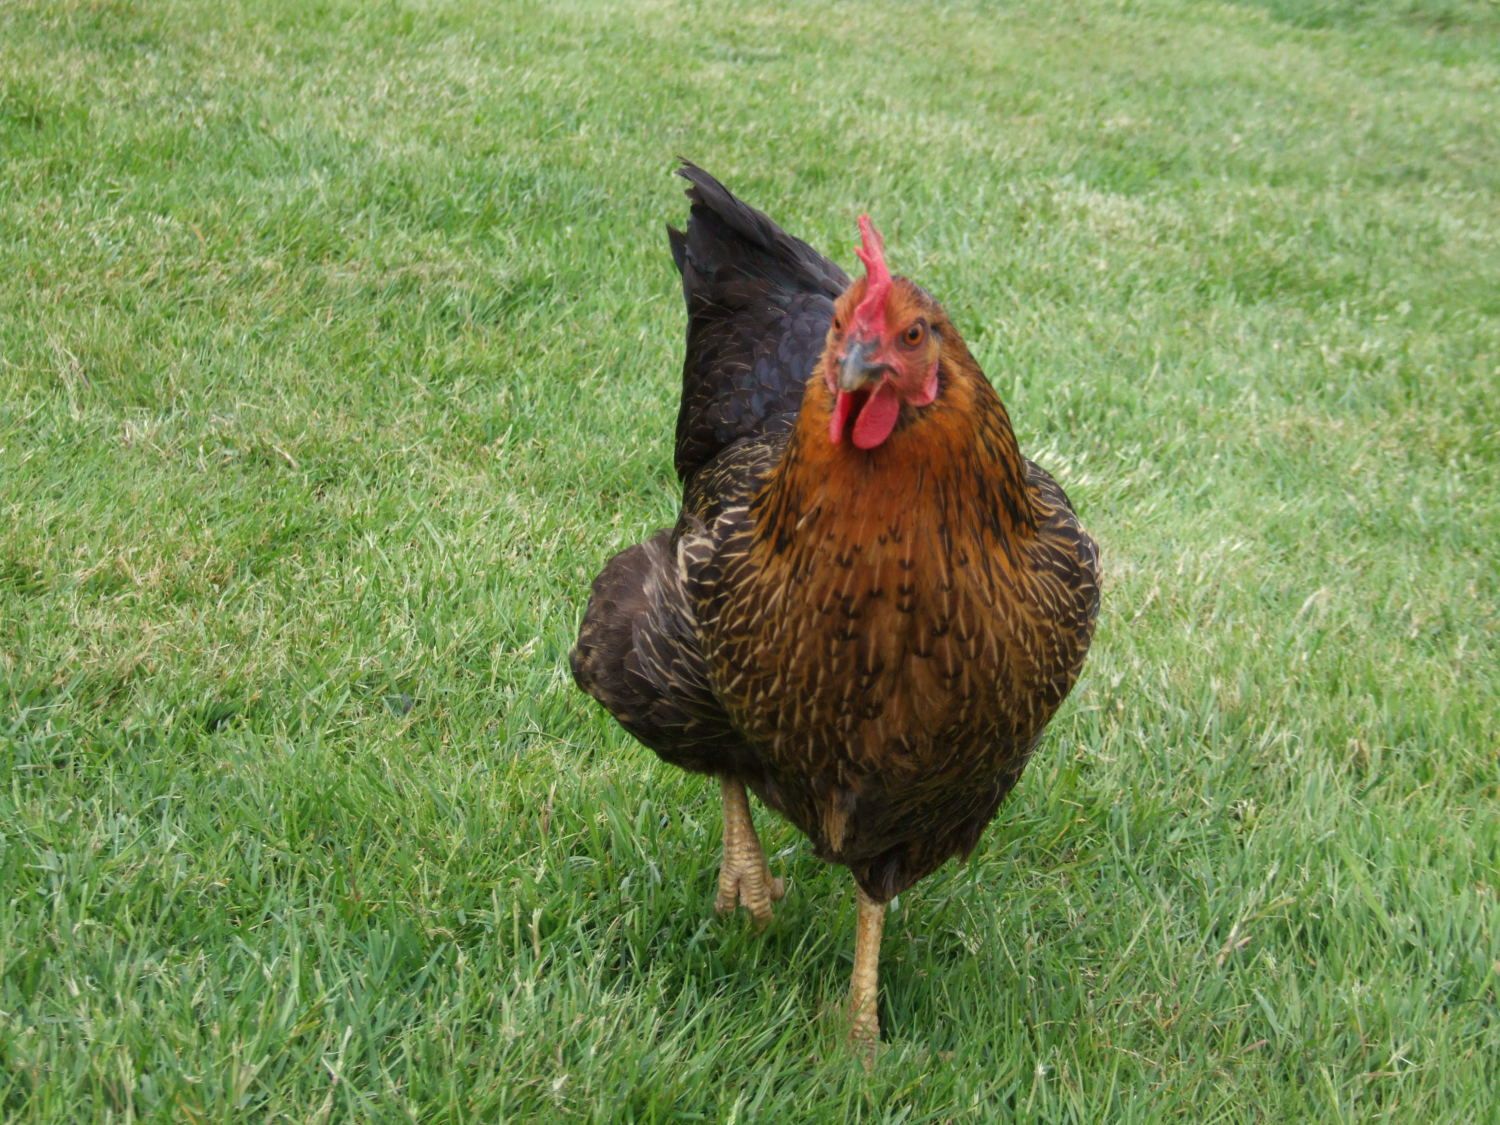 Very worried - Chicken's feet and legs turned blue / grey - rhubarb  poisoning or scaly leg? | BackYard Chickens - Learn How to Raise Chickens